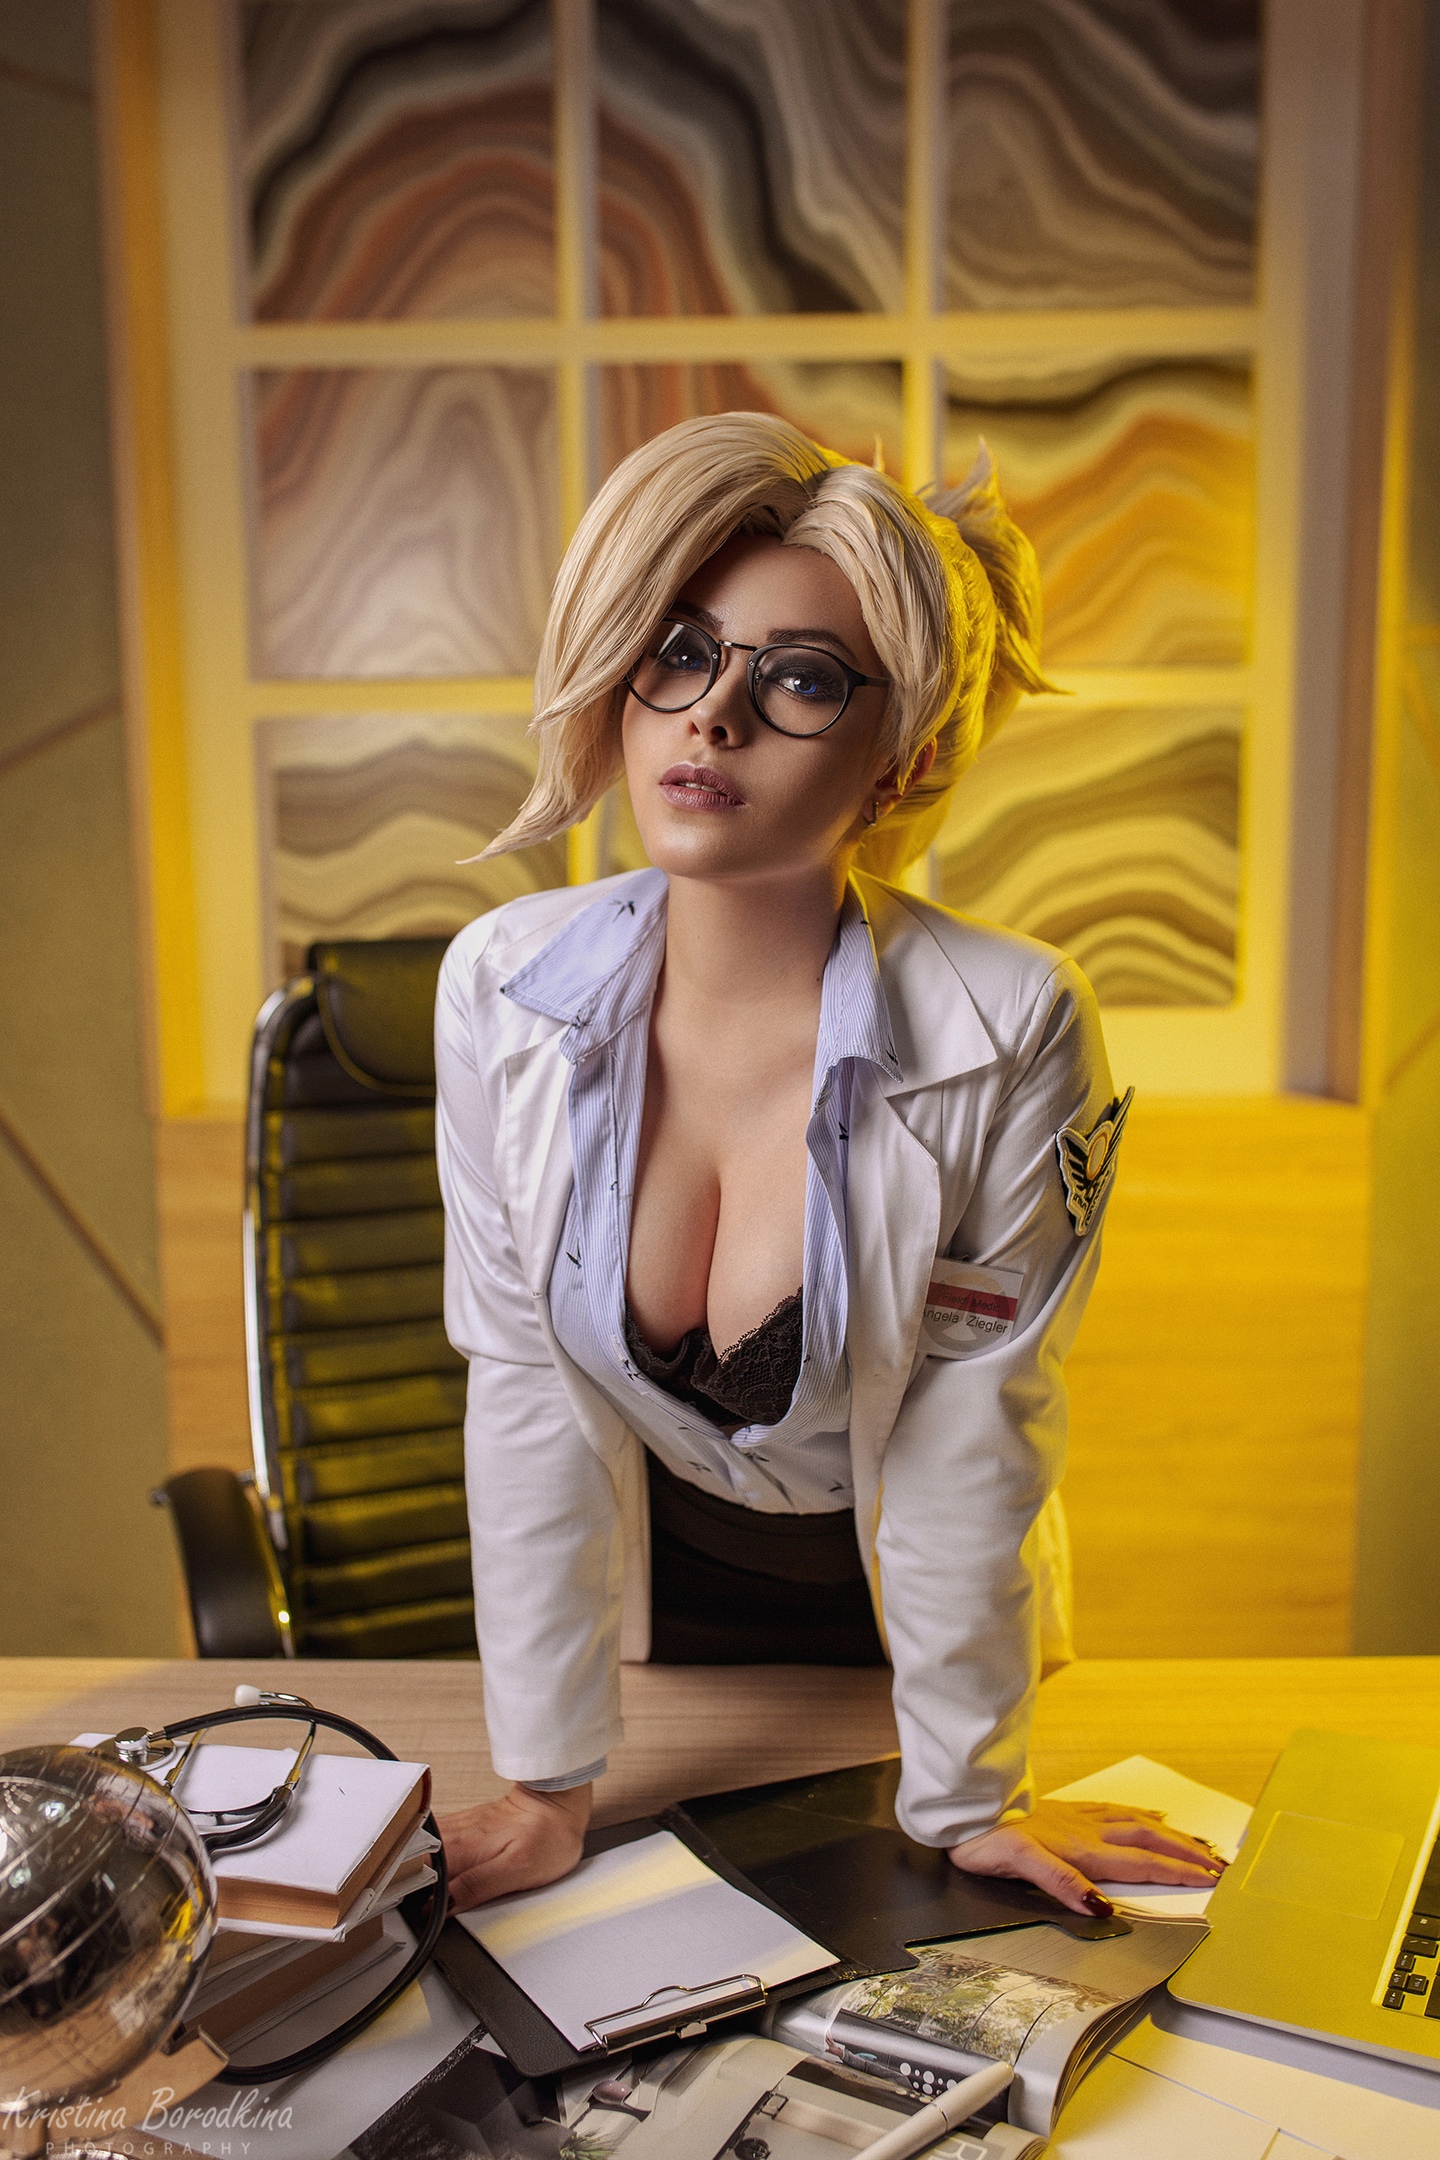 People 1440x2160 Kristina Borodkina women Overwatch cosplay Mercy (Overwatch) blonde glasses shirt open clothes cleavage bra lace desk doctors warm light lab coats